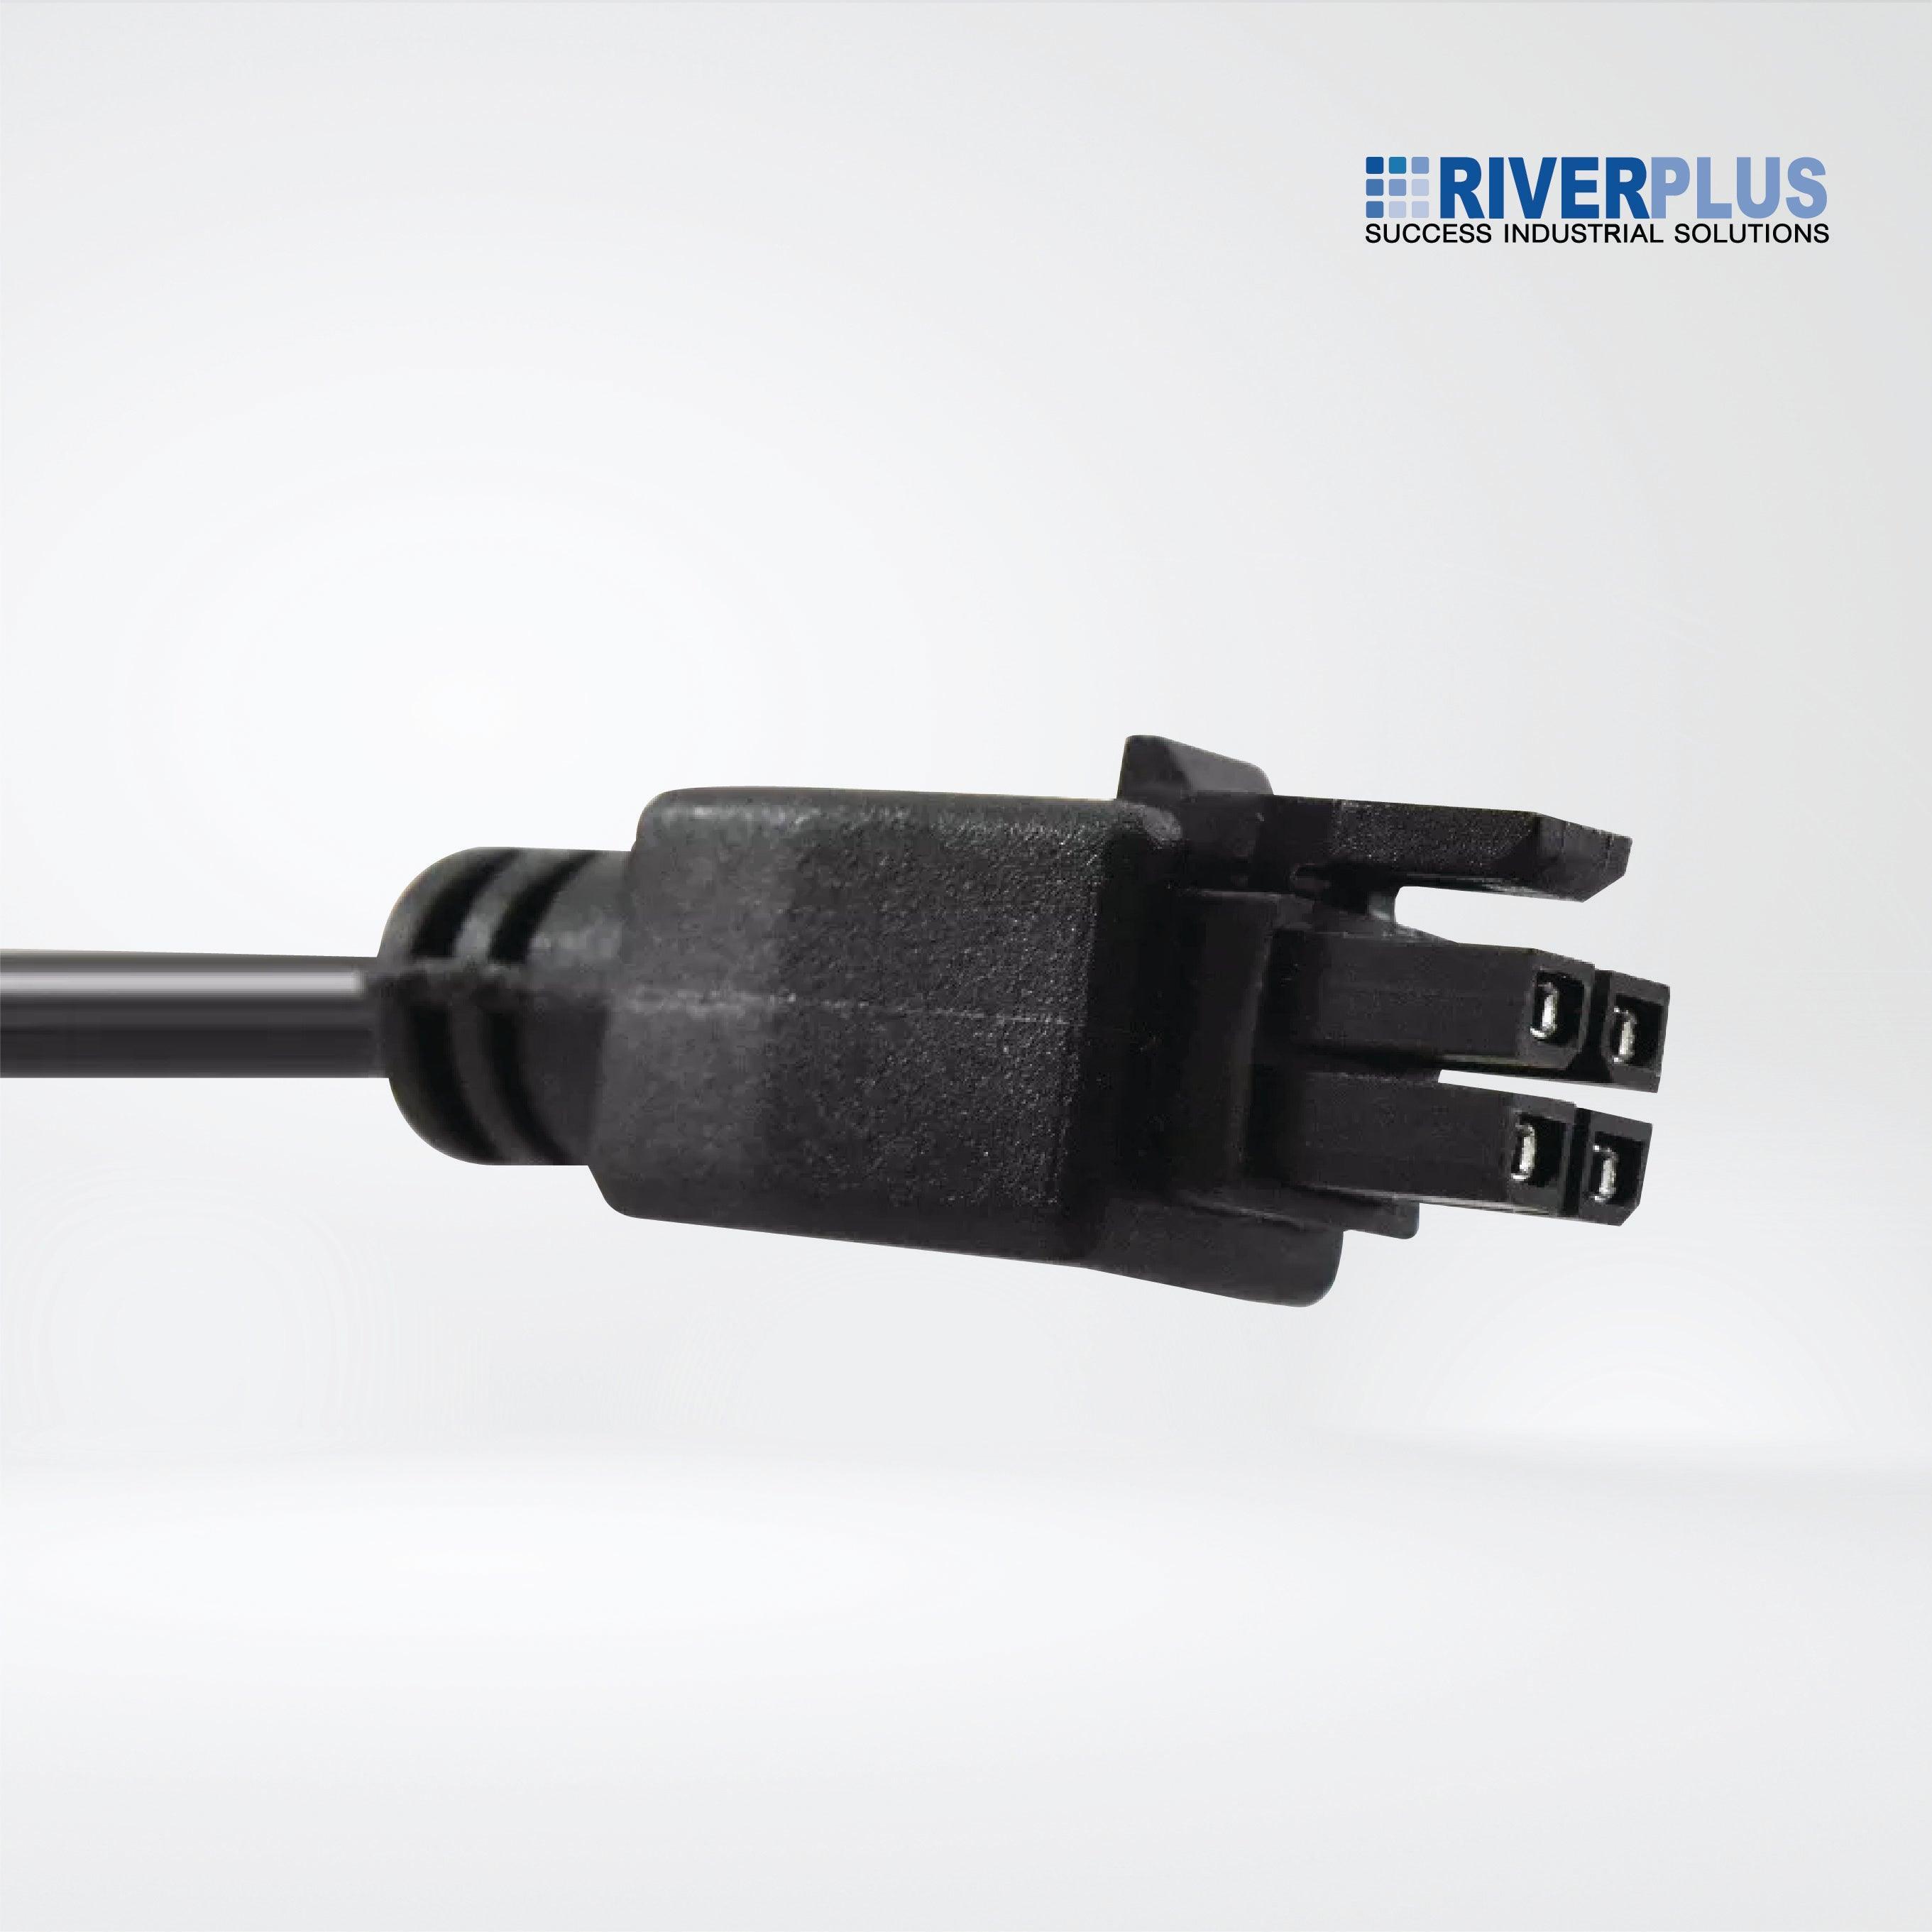 PR2FK20M Power cable with 4-Pin Micro-Fit connector - Riverplus